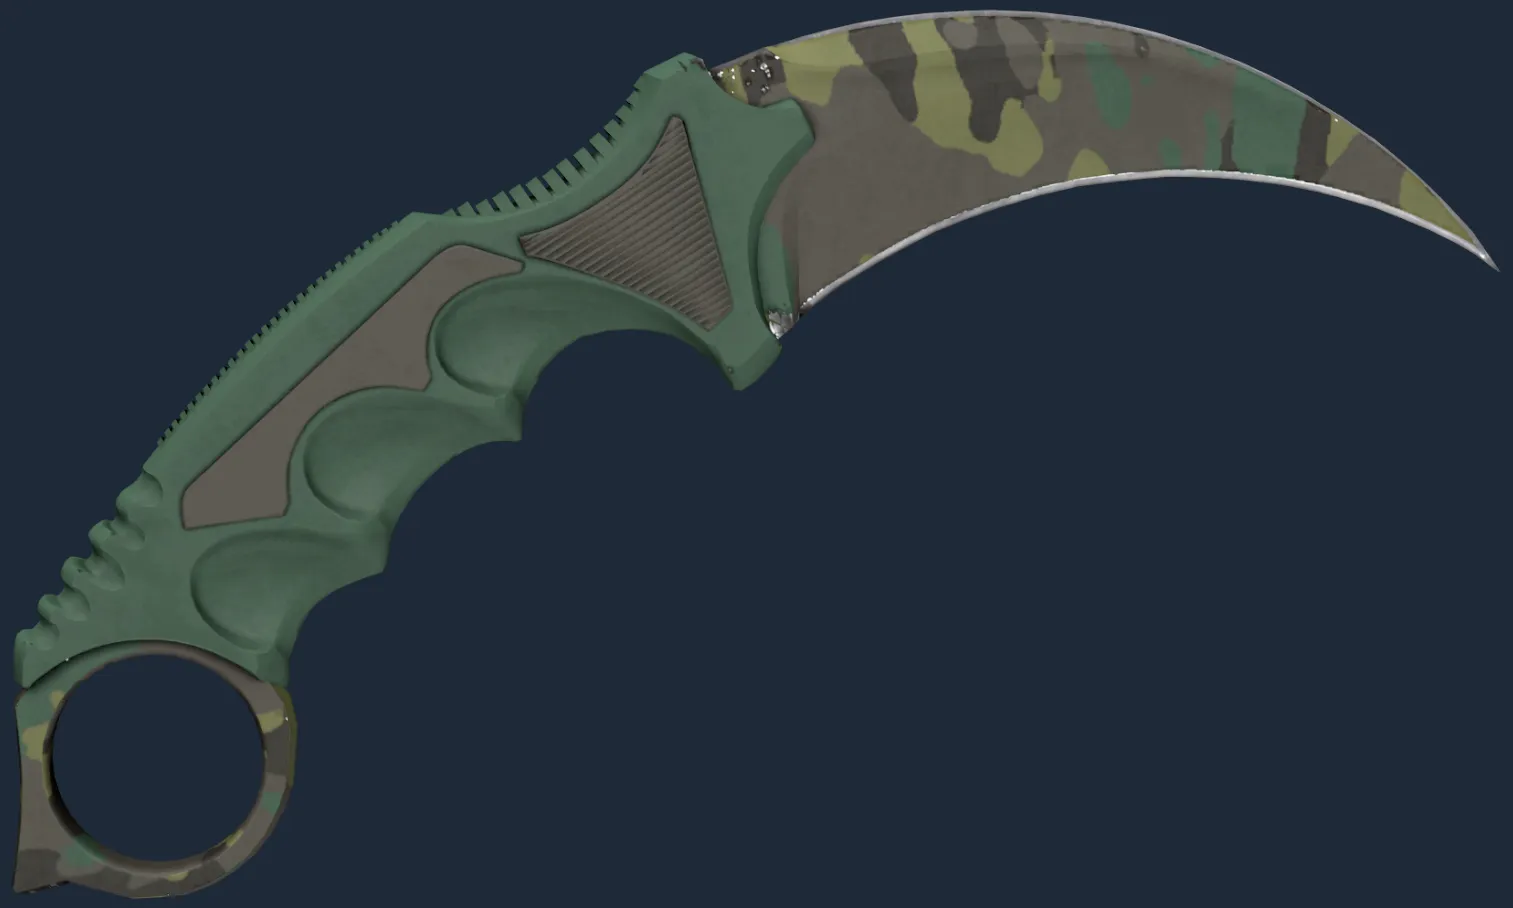 ★ Karambit | Boreal Forest (Factory New)